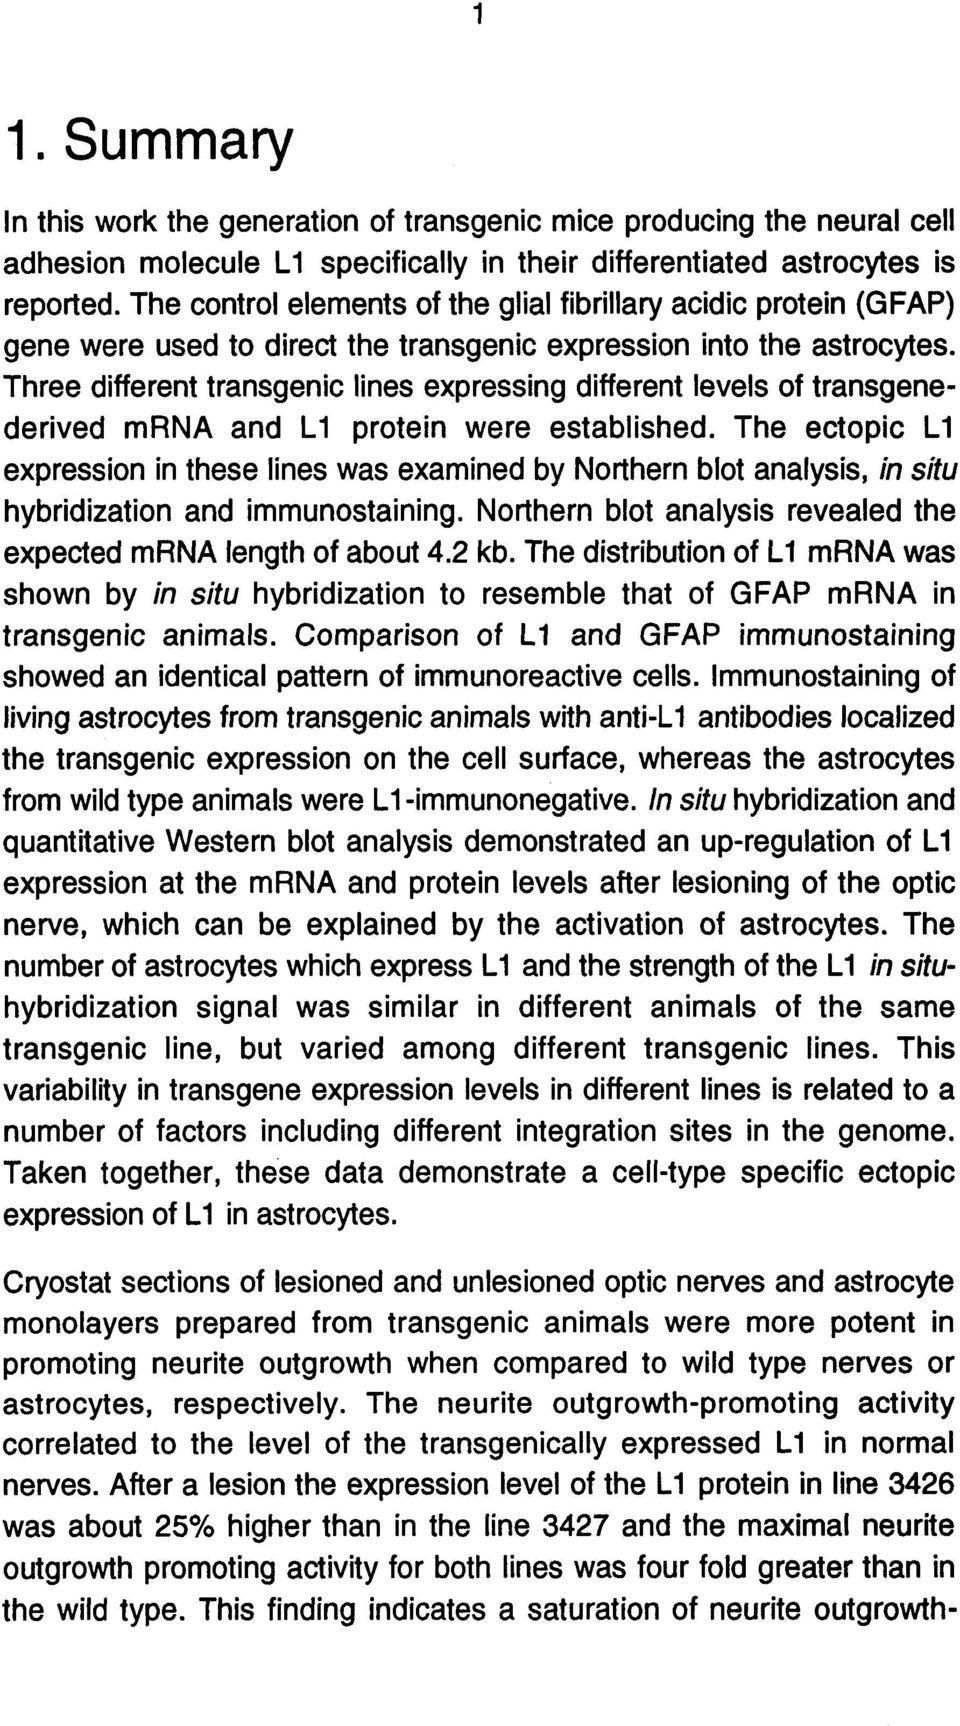 Three different transgenic lines expressing different levels of transgenederived mrna and L1 protein were established.